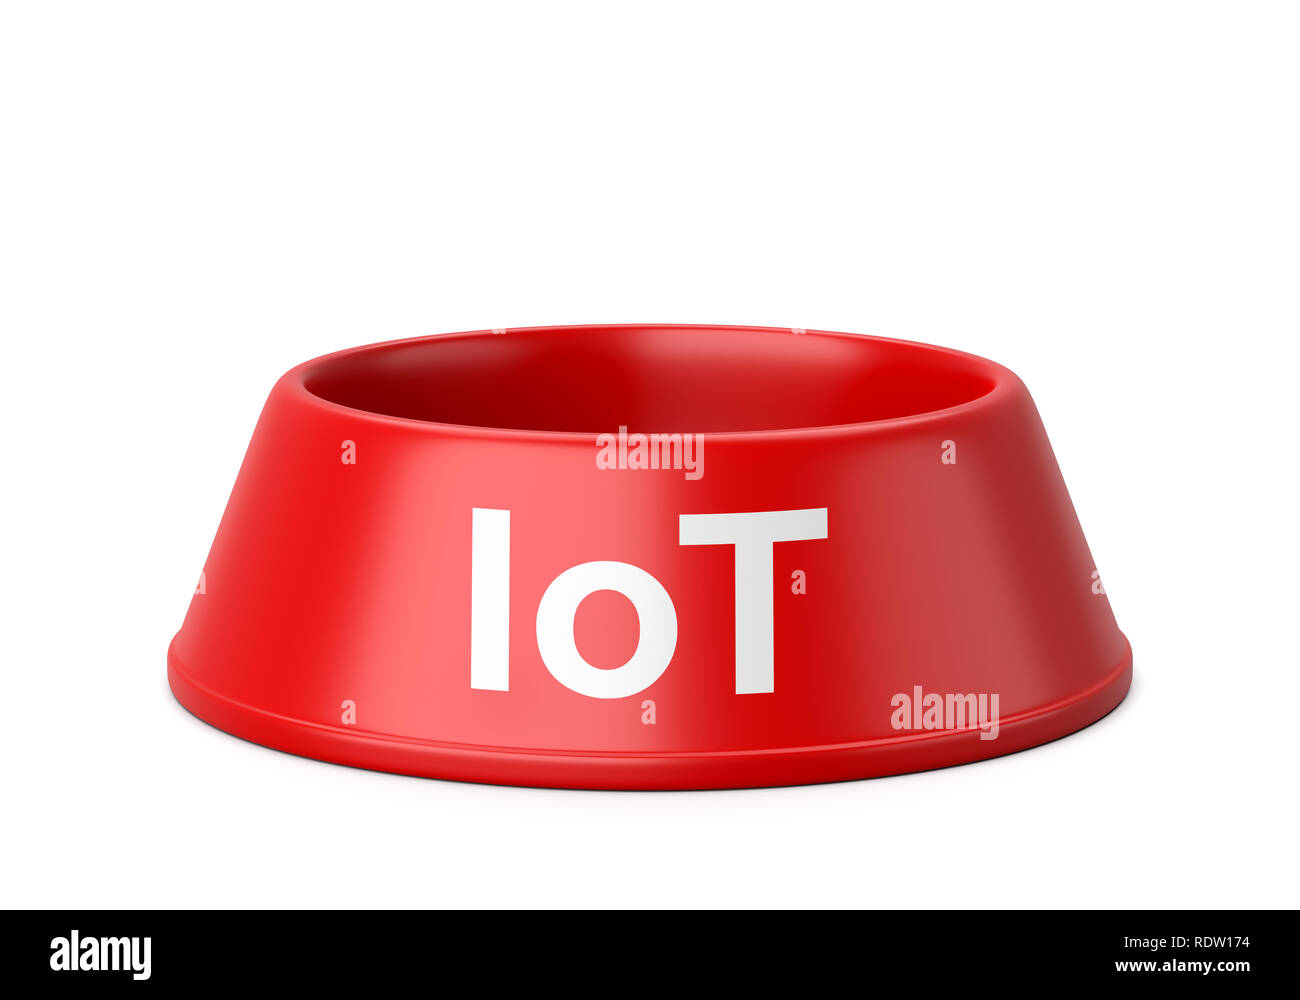 Empty Red Plastic Pet’s Bowl with IoT Text Isolated on White Background 3D Illustration, Internet of Things Concept Stock Photo